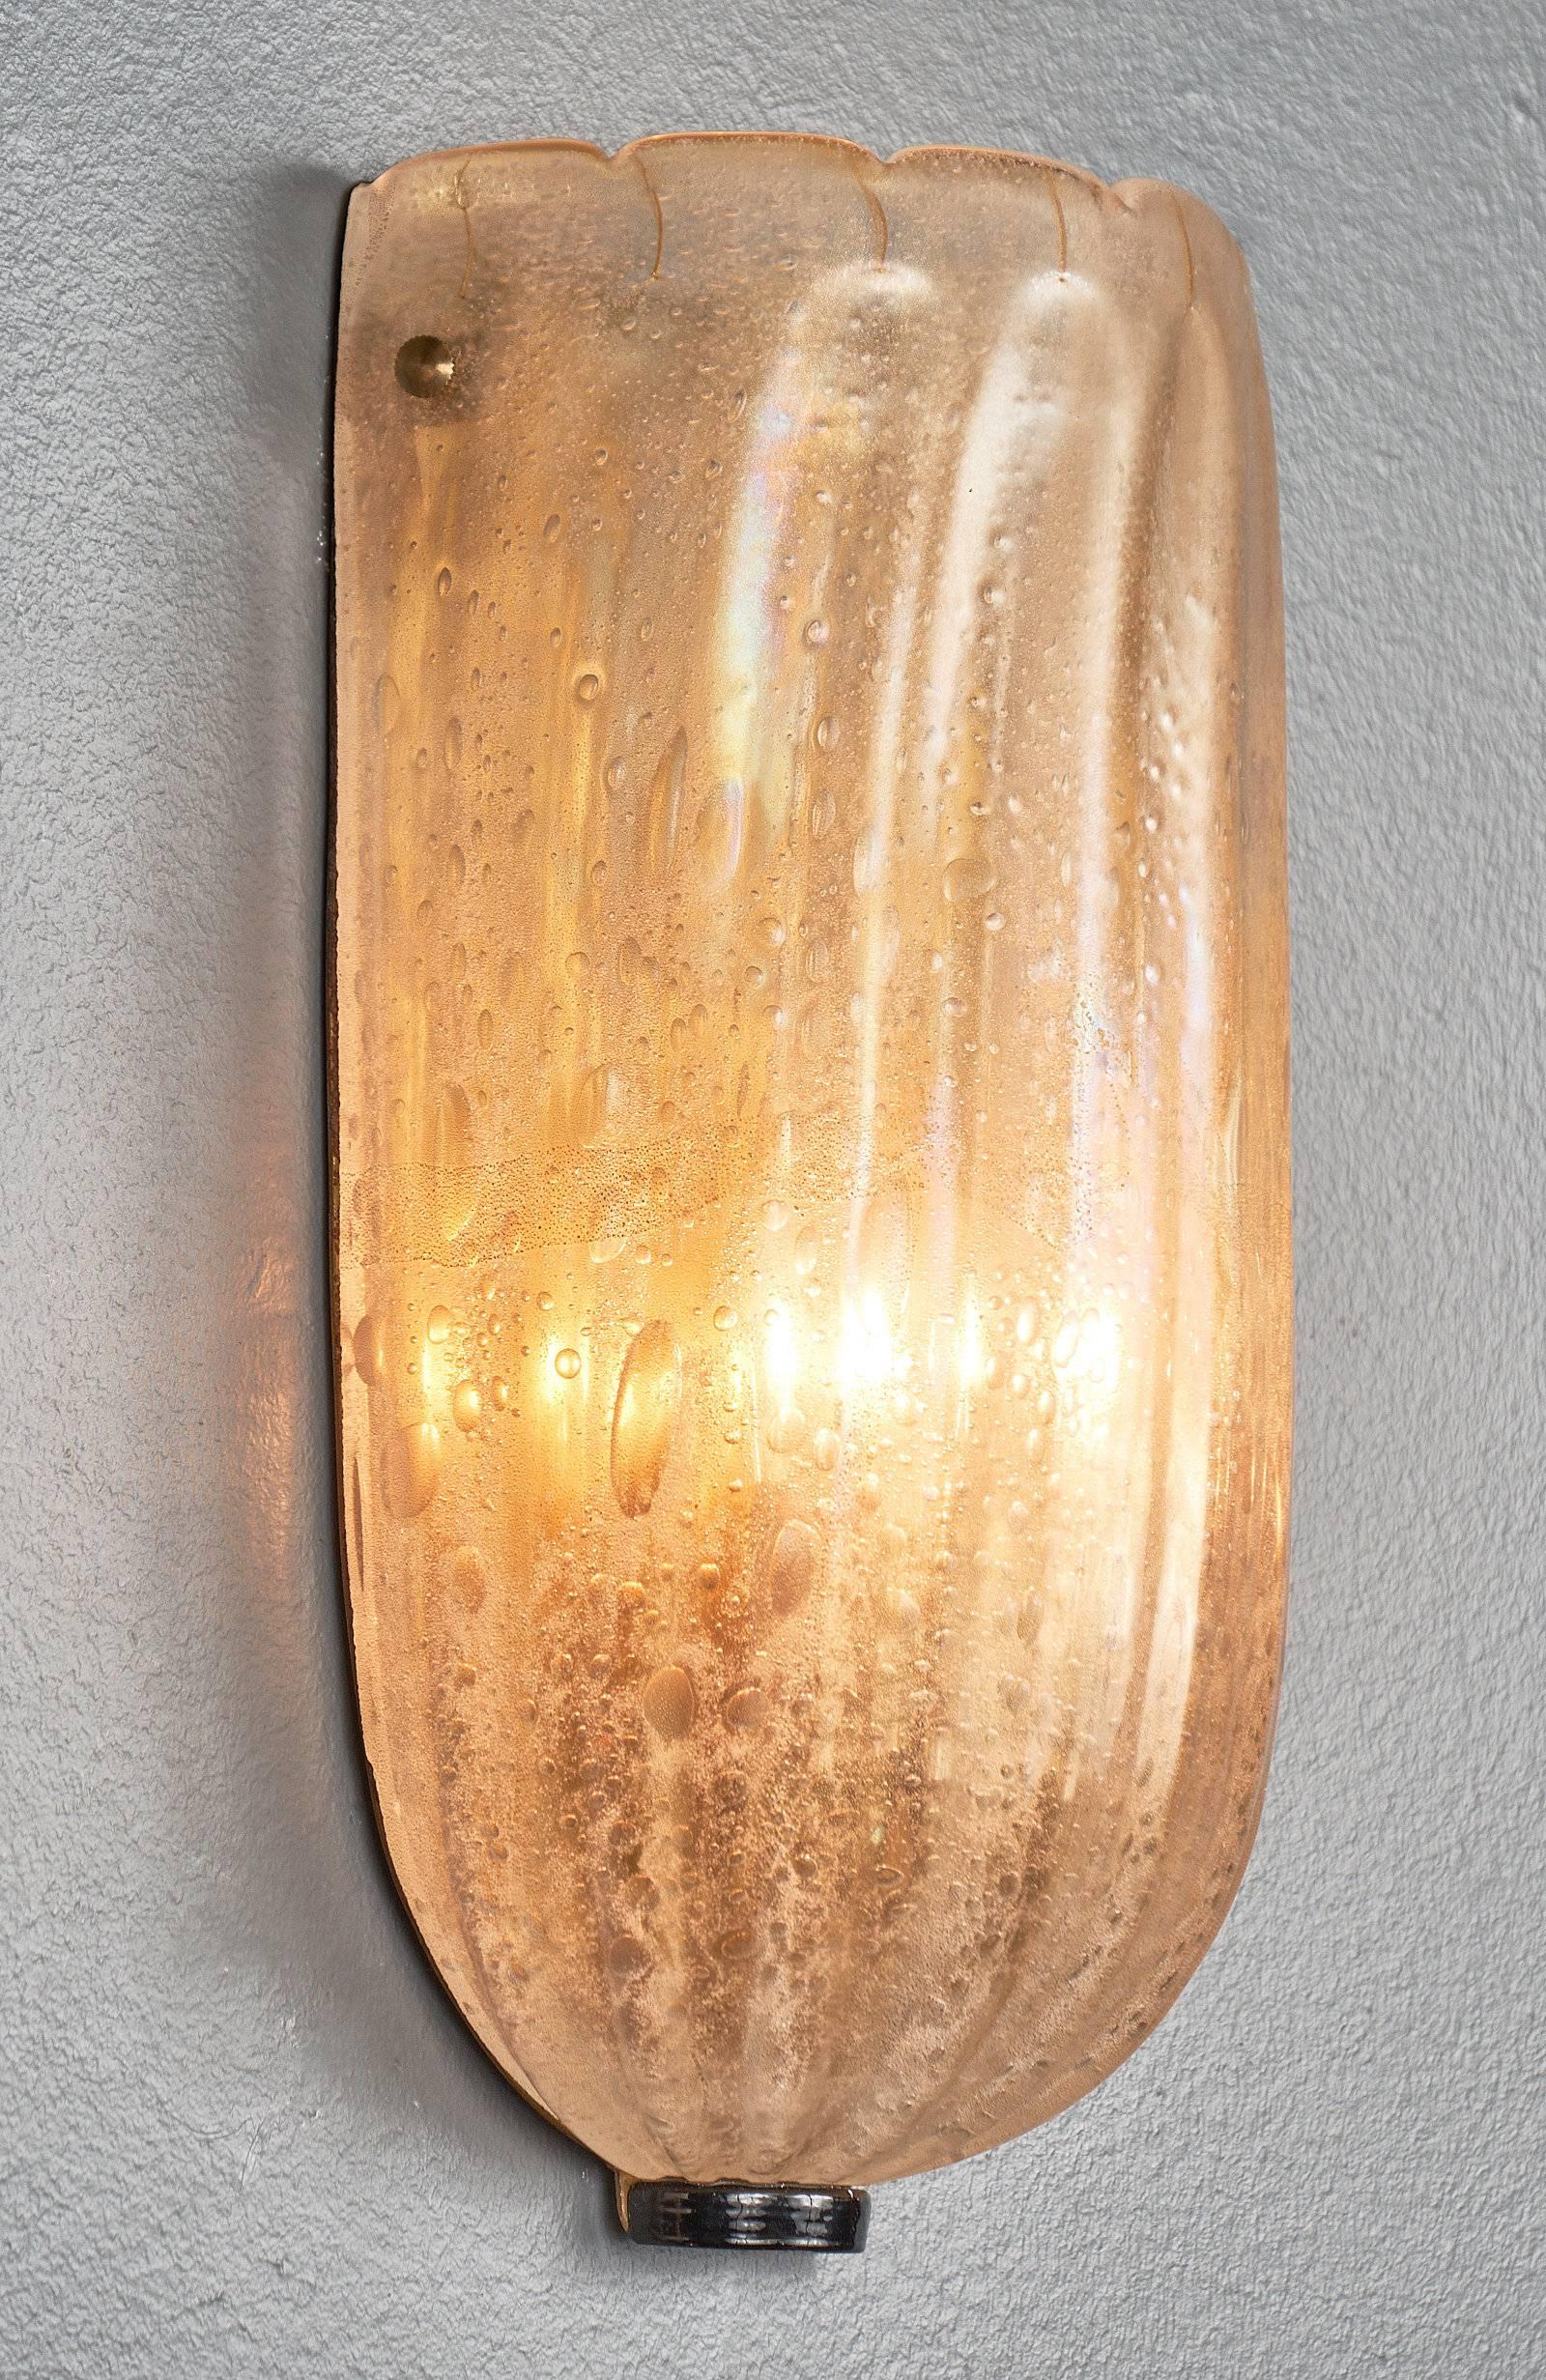 Vintage Italian pair of sconces made of hand blown Murano glass infused with gold flecks for an iridescent effect. Made in the pulegoso technique, air bubbles are formed in the glass, adding texture and depth. We loved the classic look yet organic